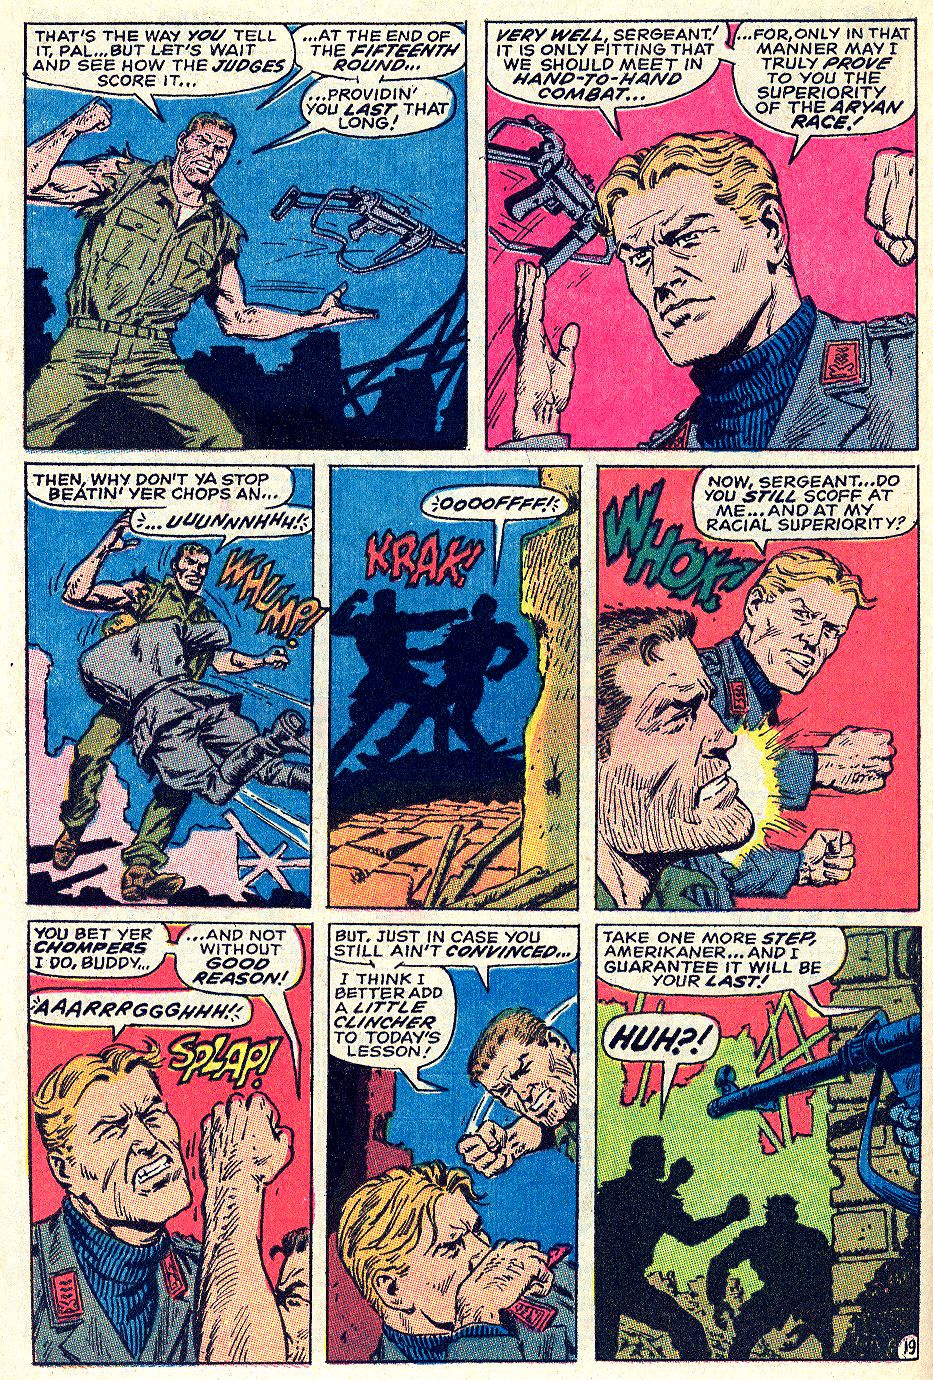 Read online Sgt. Fury comic -  Issue #66 - 28